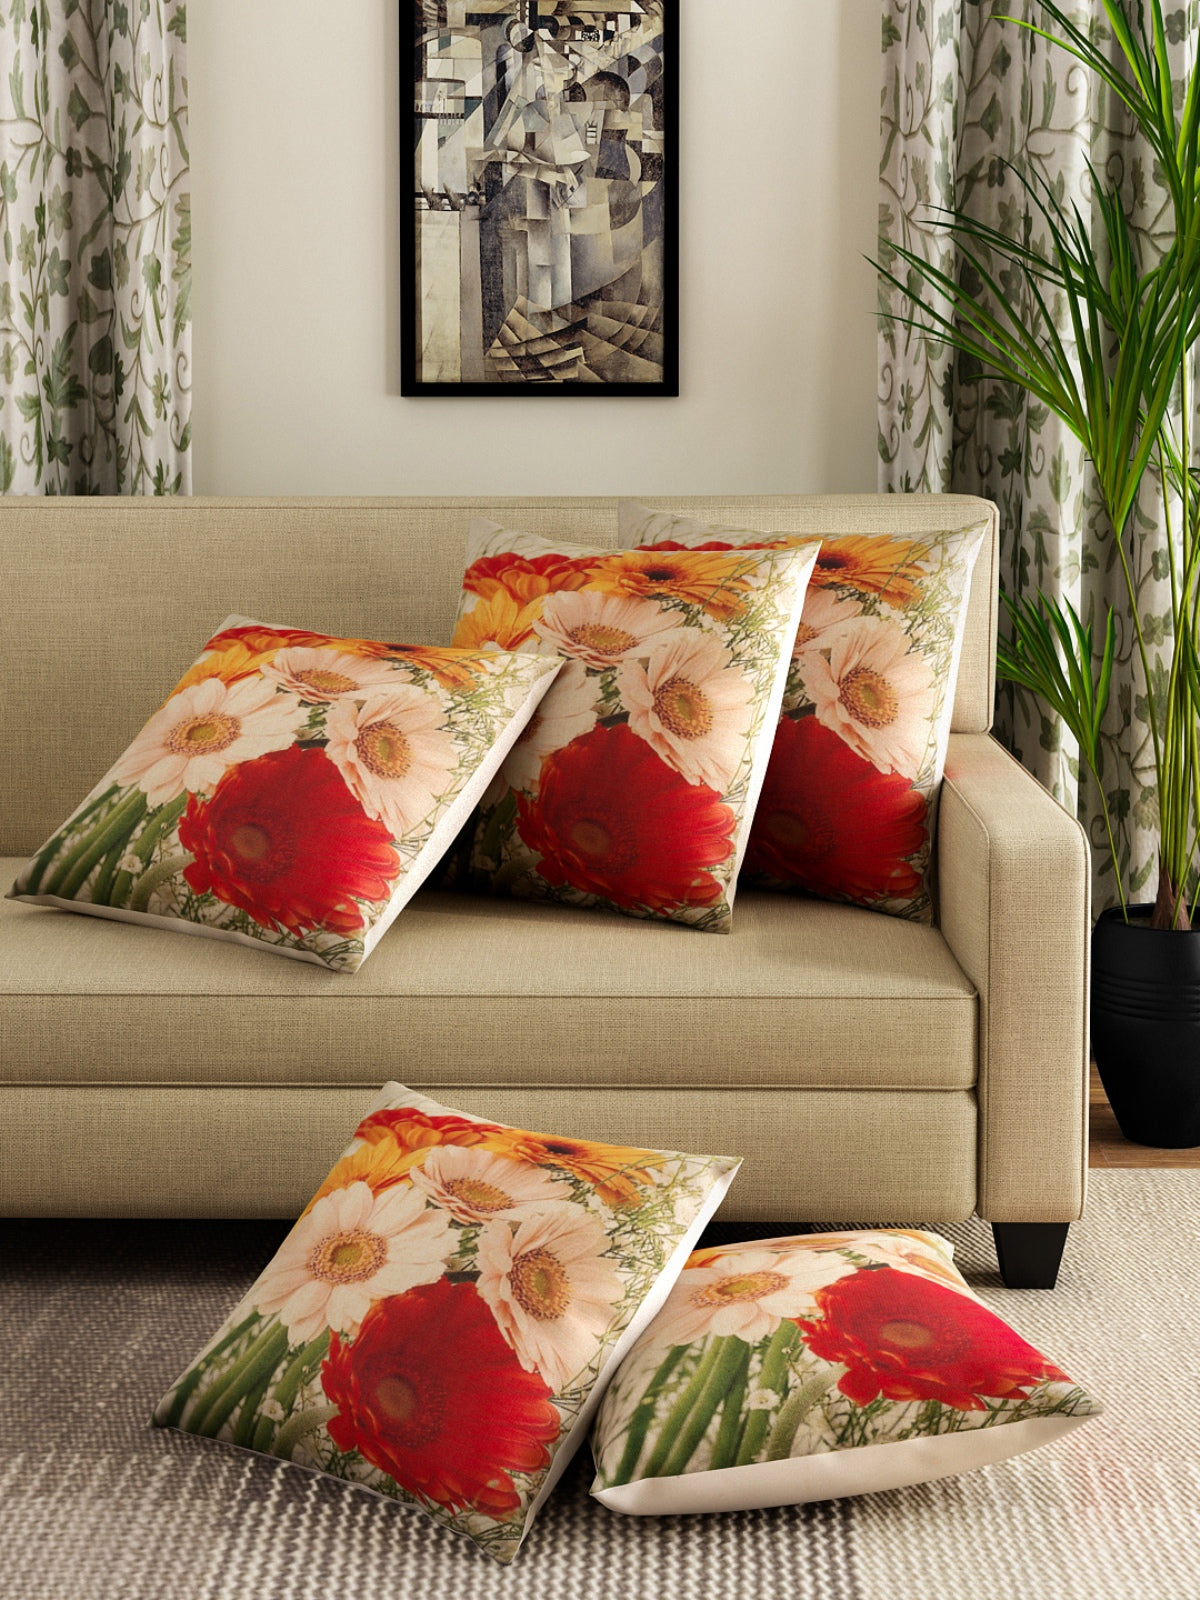 Soft Jute Floral Print Throw Pillow/Cushion Covers 16x16, Set of 5 - Multicolor